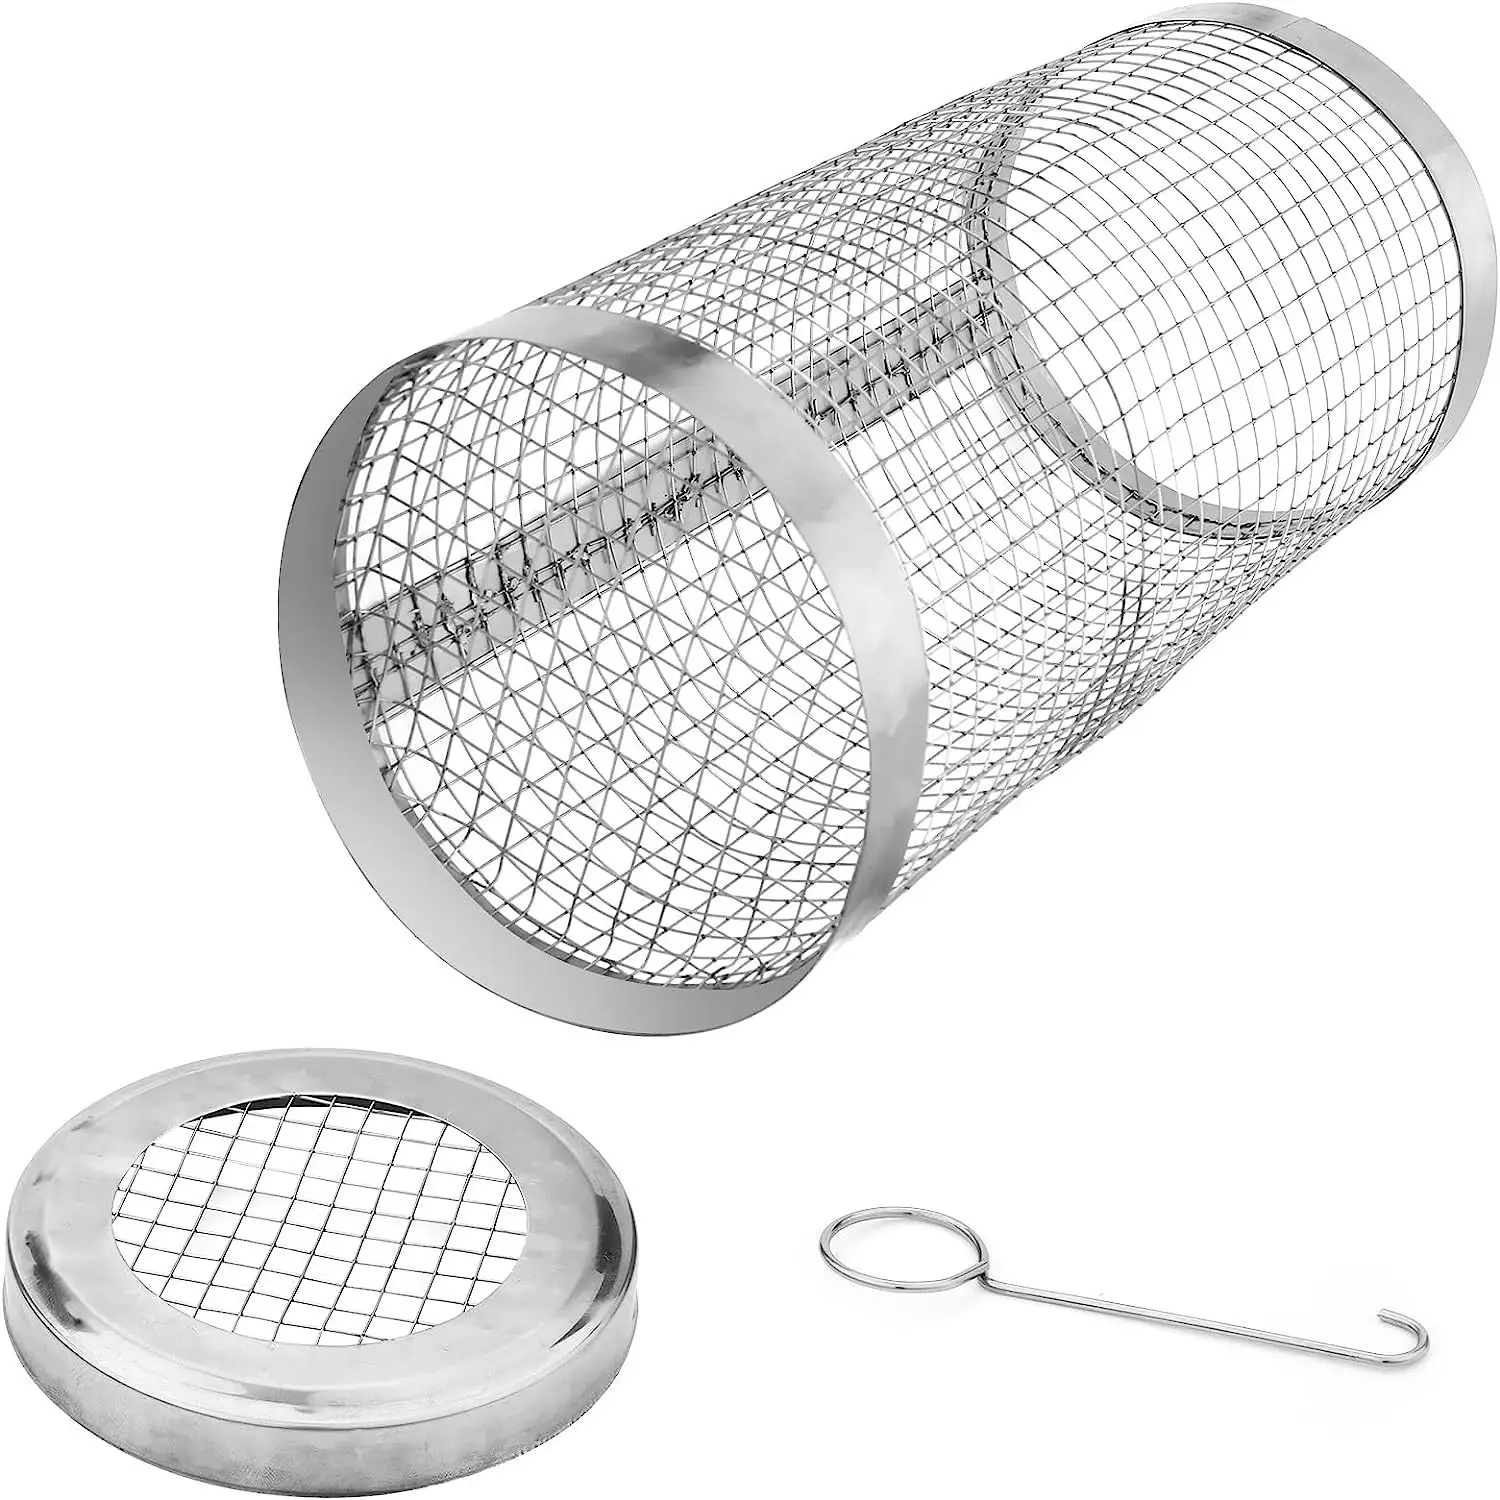 Stainless steel Barbecue cage grill round Barbecue basket outdoors BBQ multi-purpose Easy to flip High temperature resistance